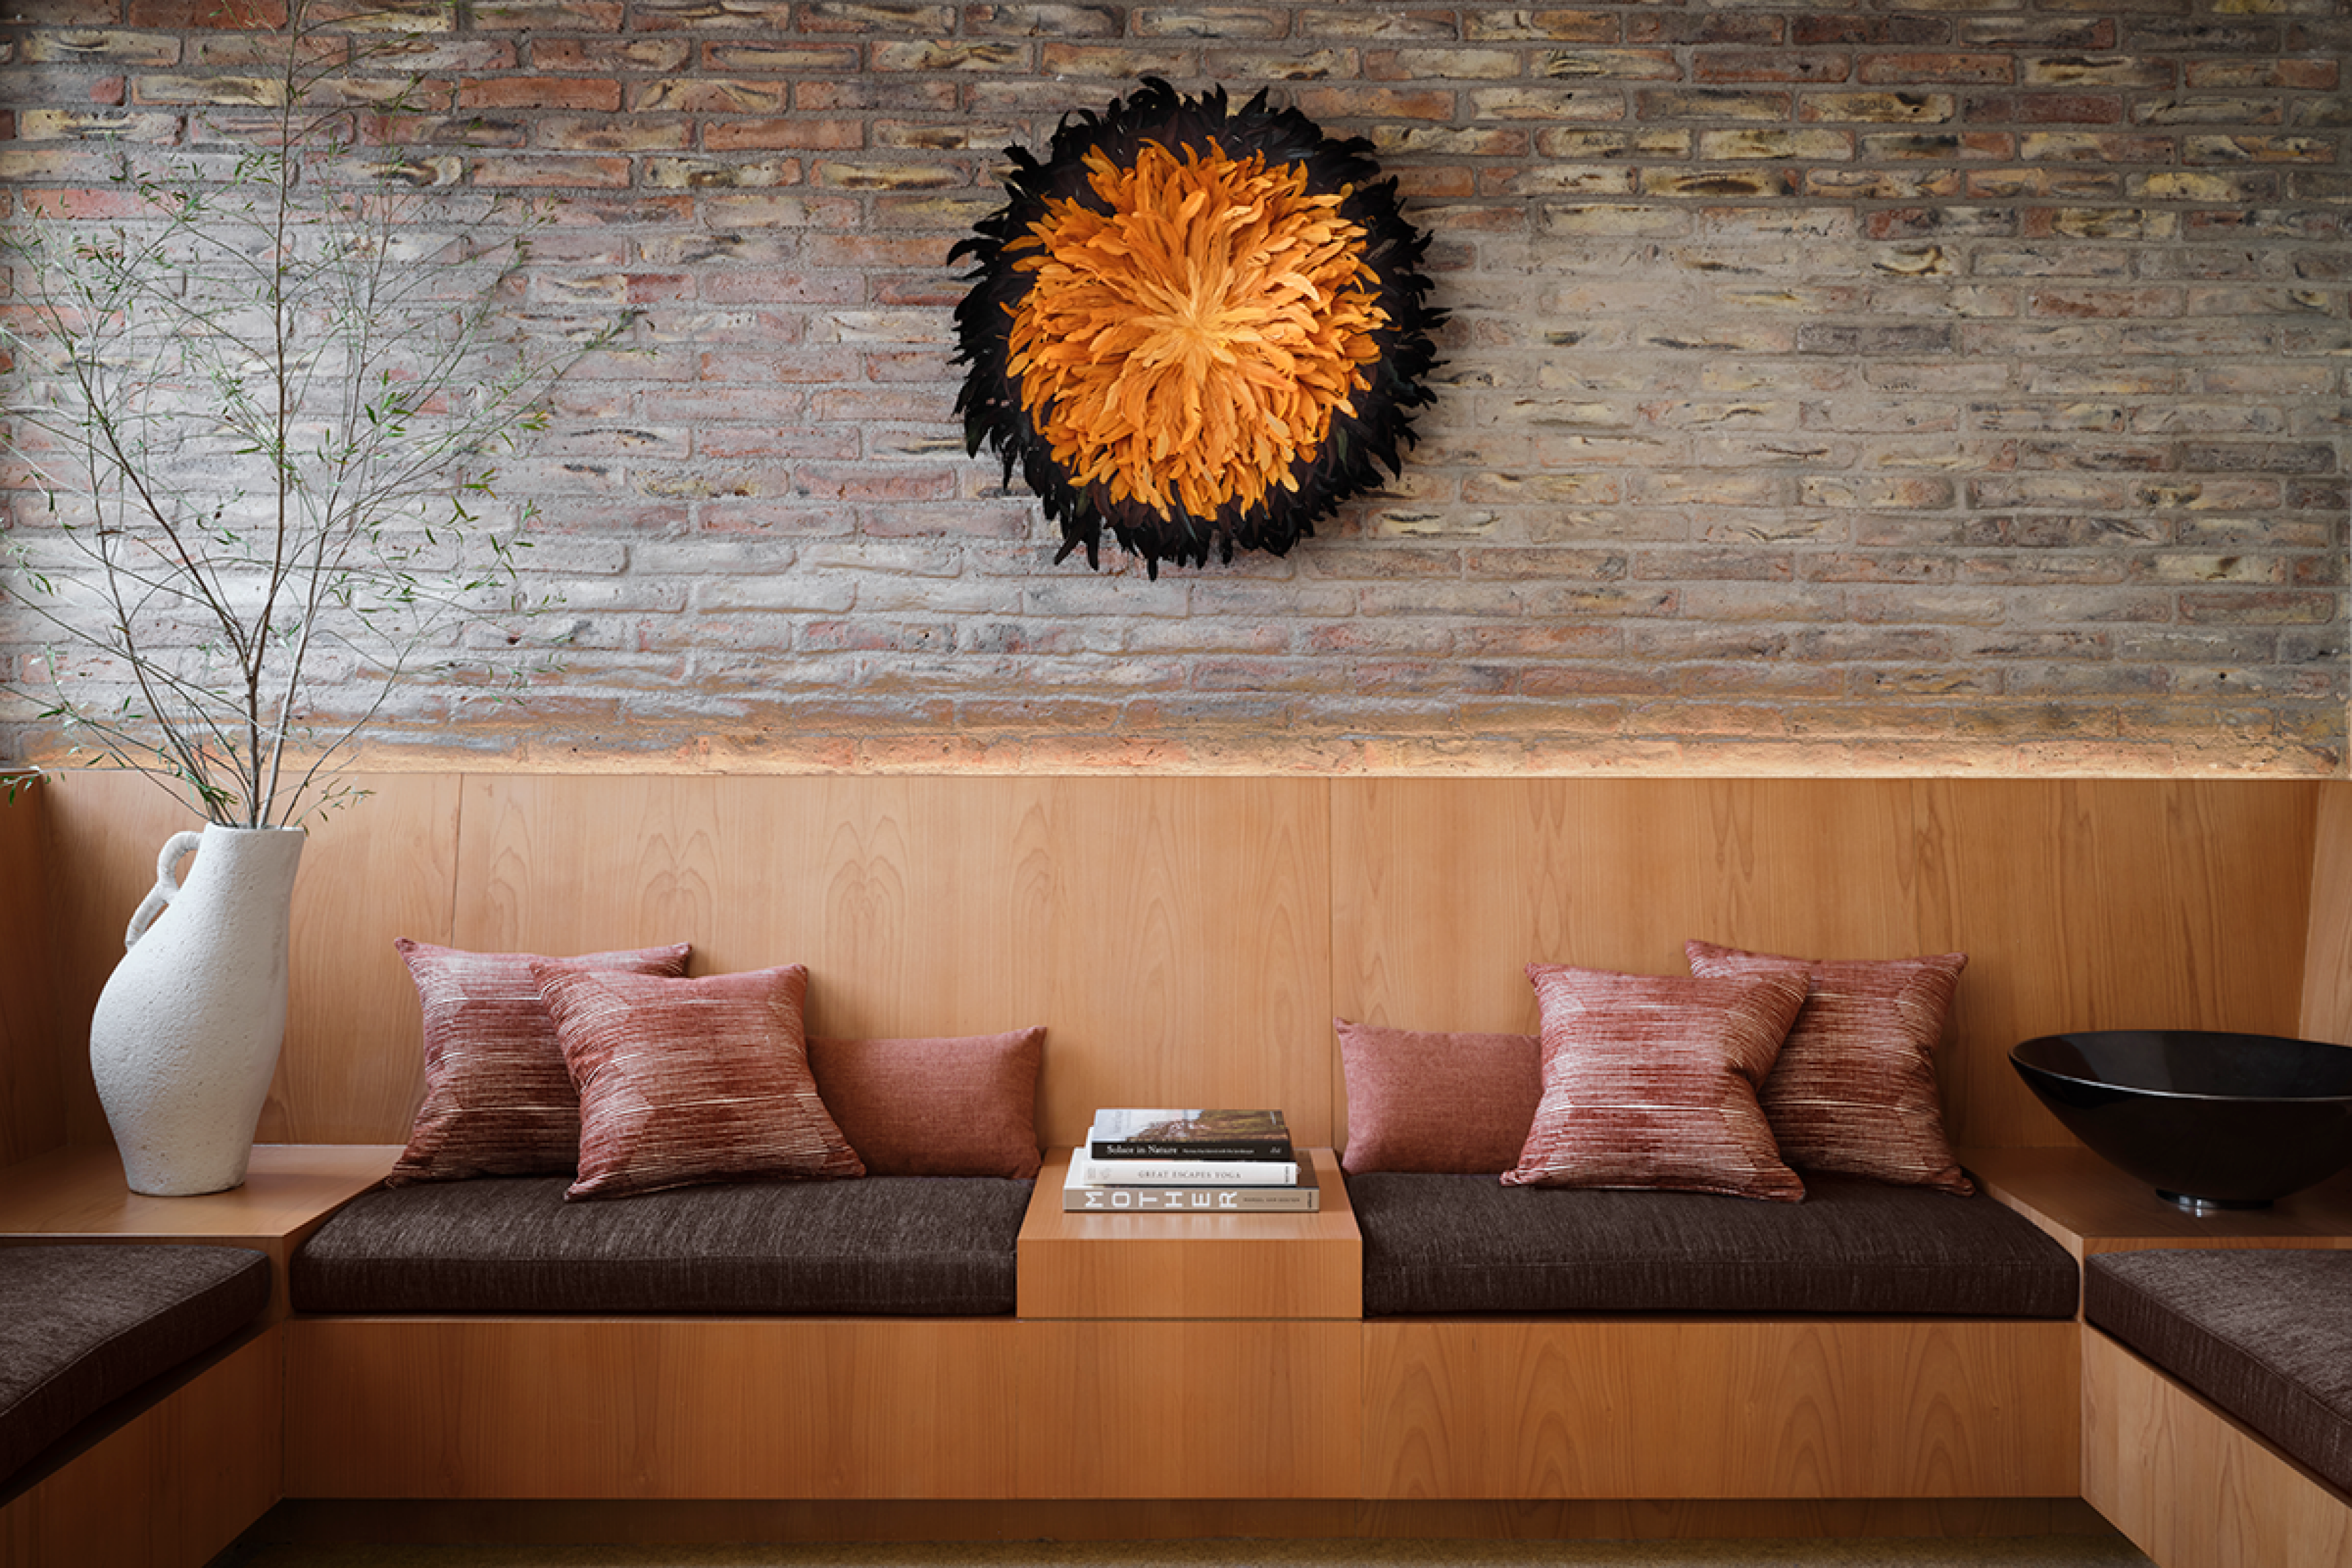 wooden couches built into a wall with grey cushions and purple silk pillows. There are books and magazines out to read. The wall is stone with a large circular art hanging 